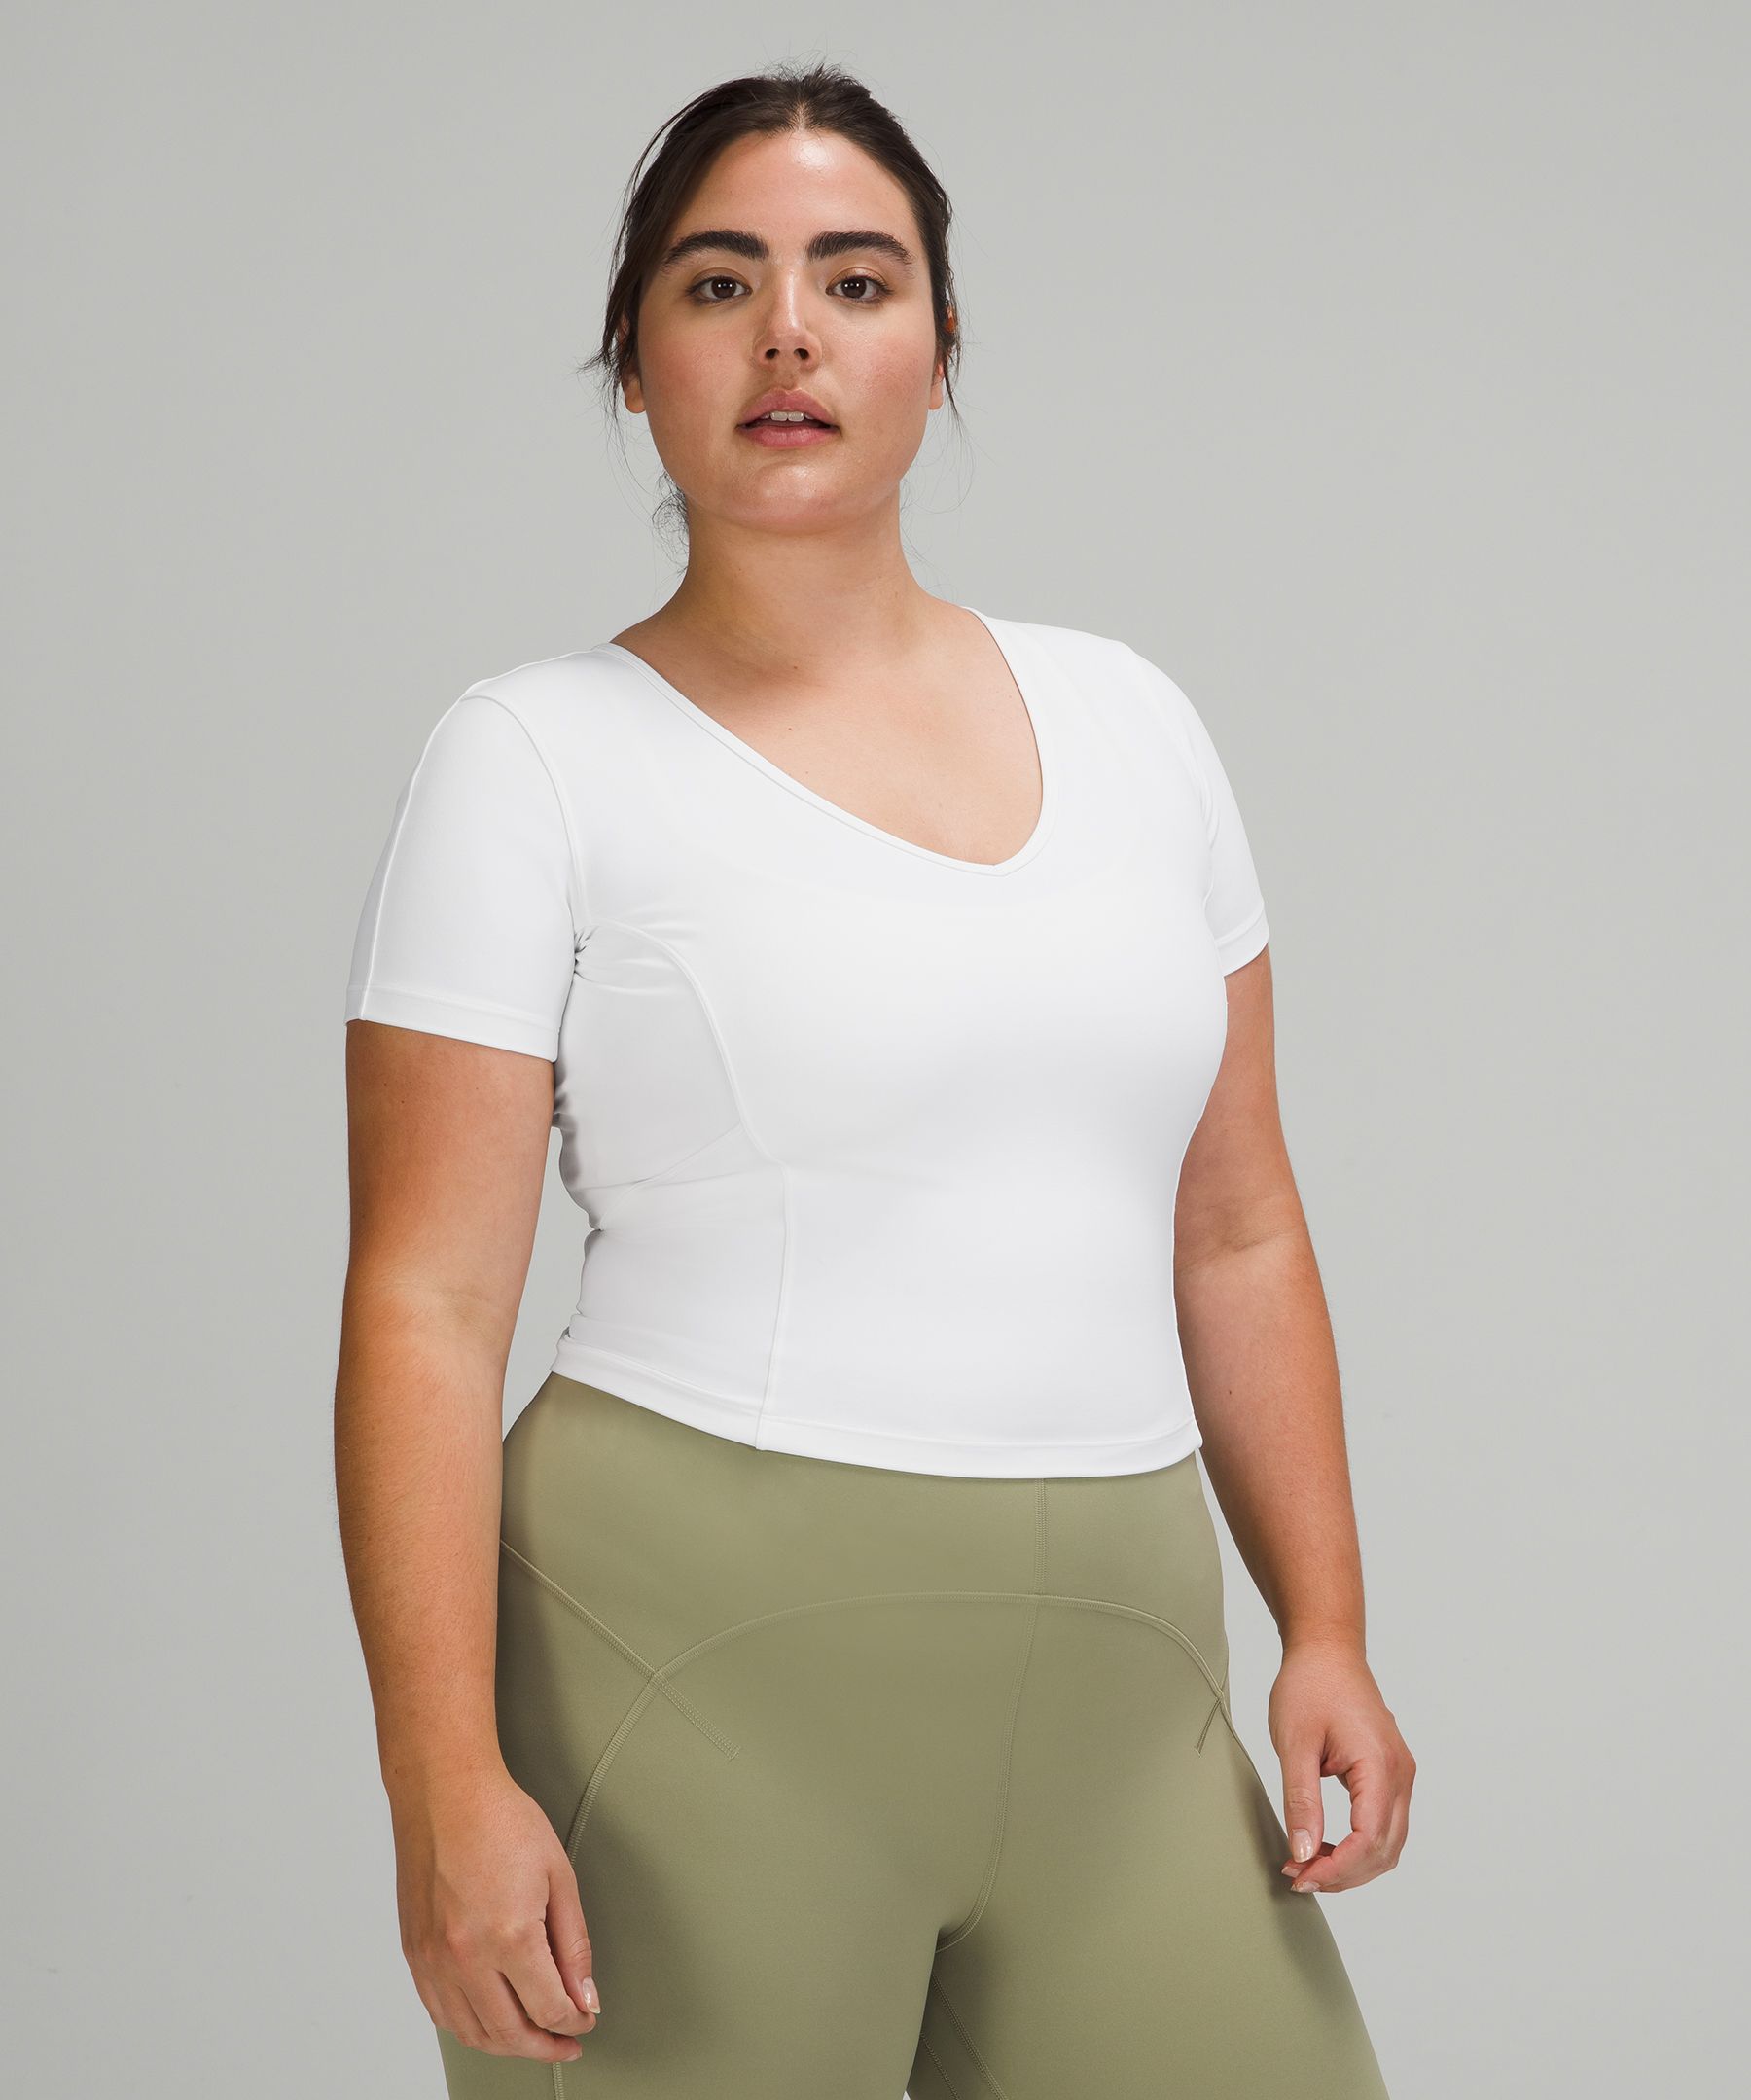 Nulu cropped slim yoga SA was an instant buy for me when I tried it on in  store. Beautiful baby pink and super flattering fit. I did size up to a 6